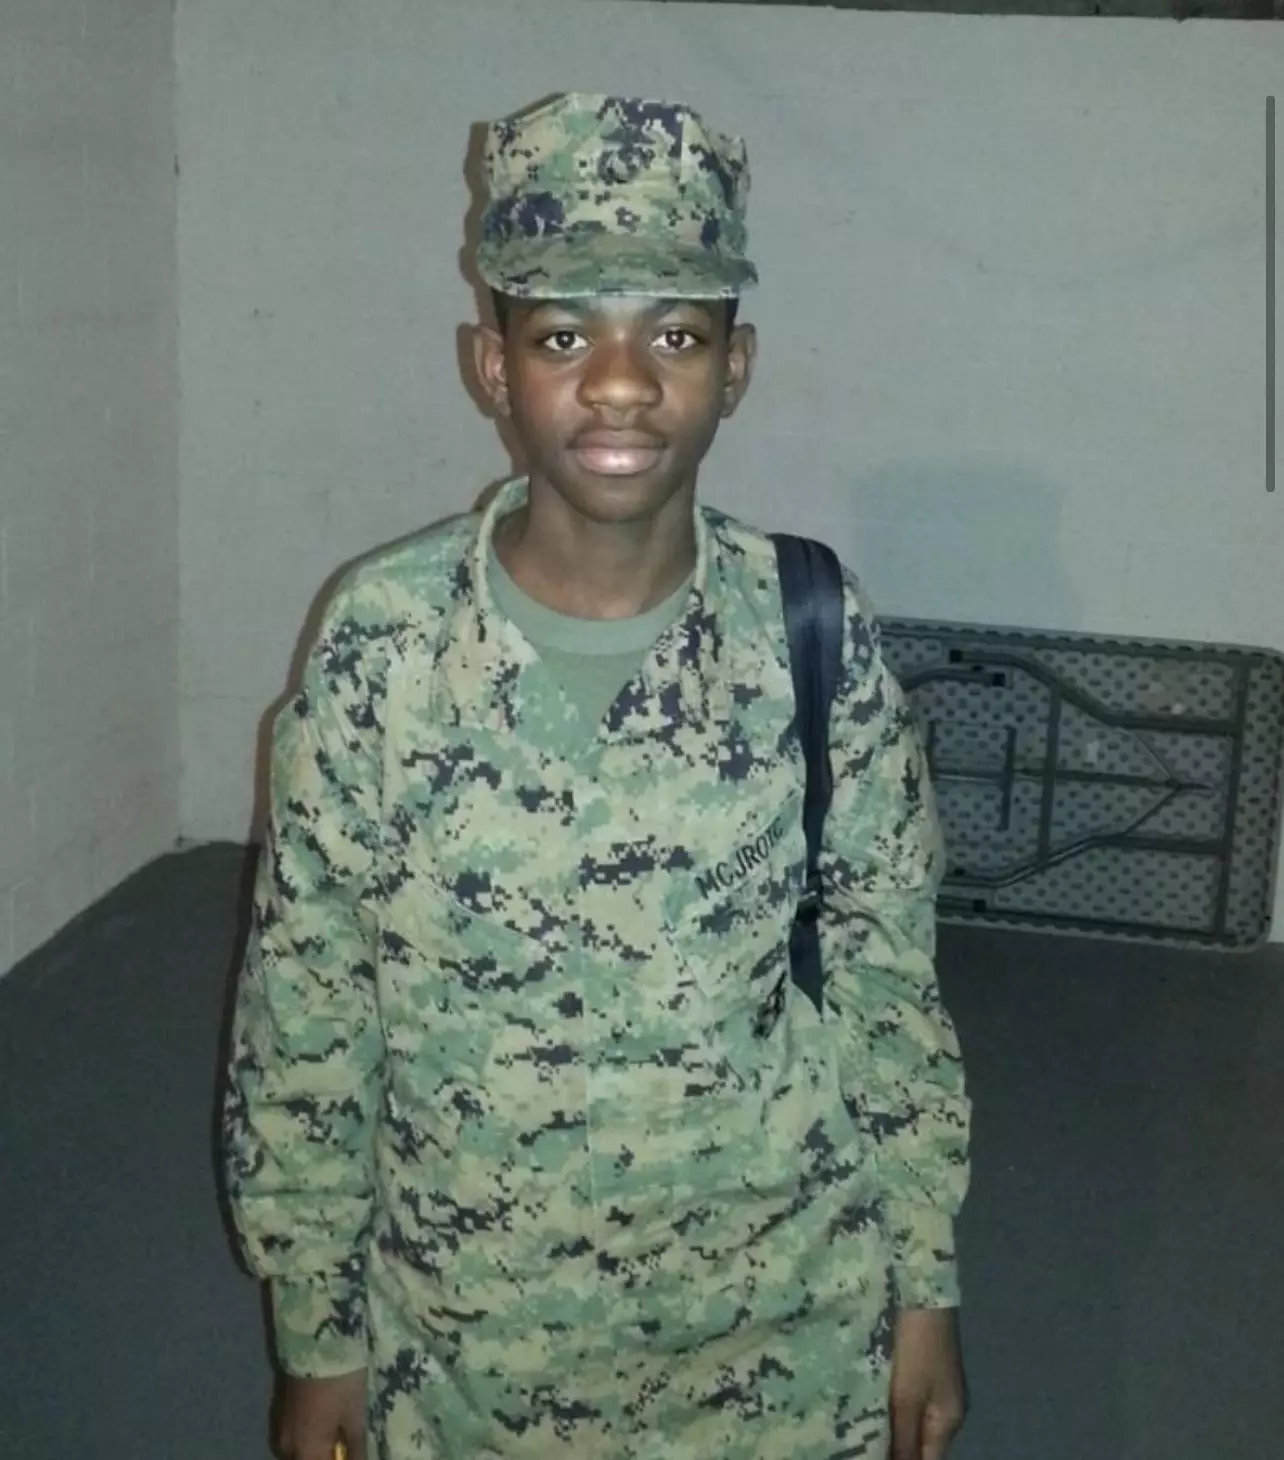 A photo which looks like Lil Nas X in a military uniform is circulating on Twitter. (